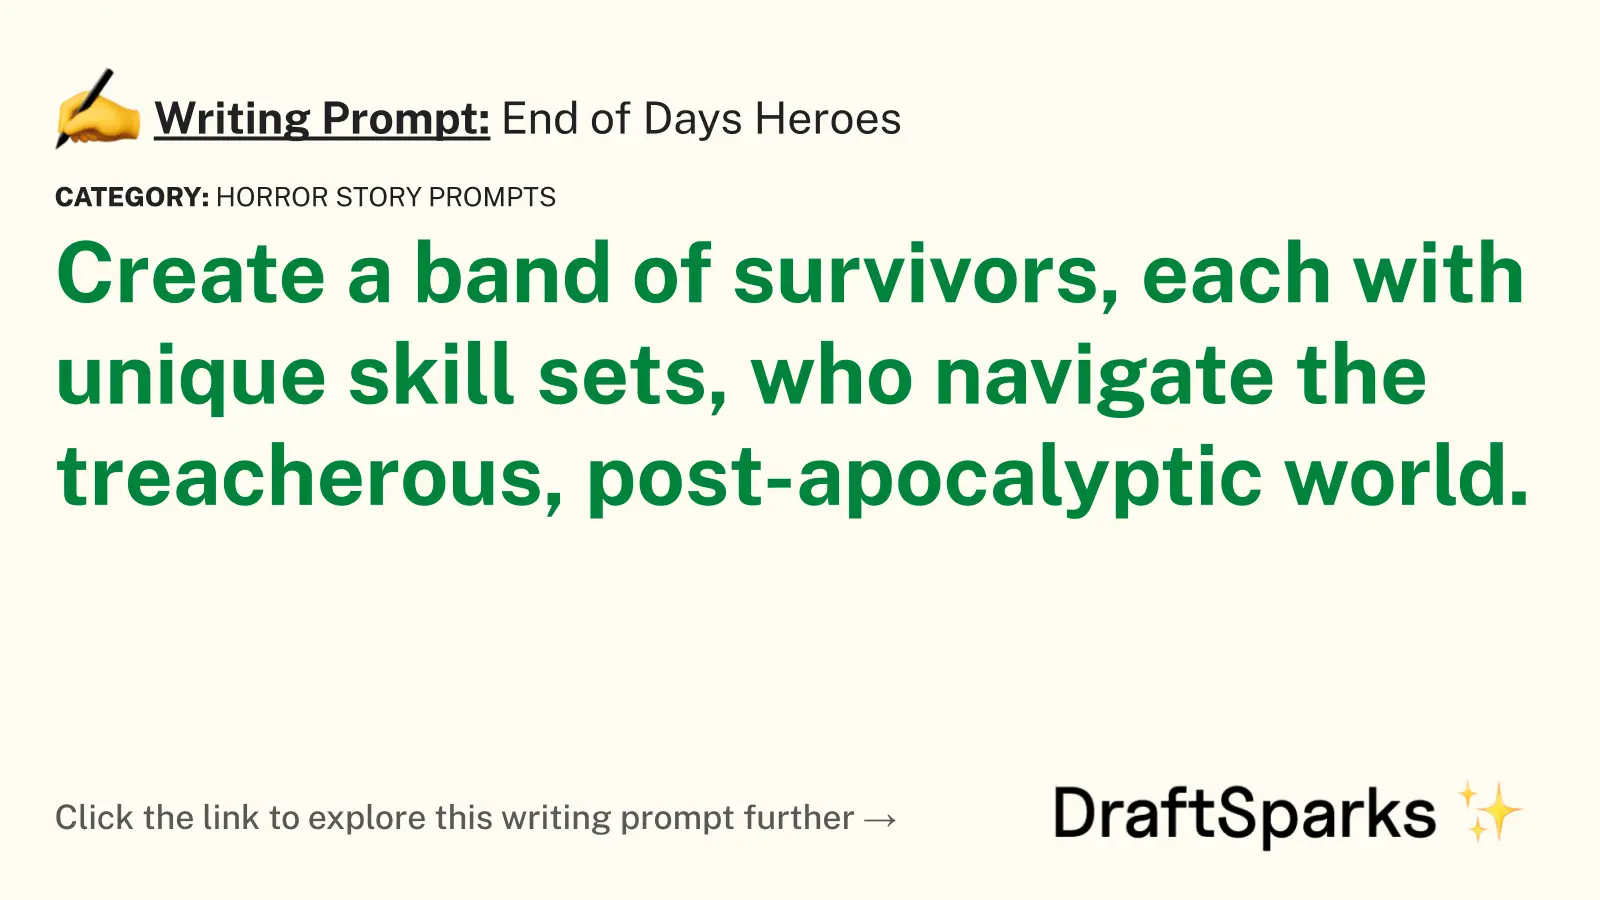 End of Days Heroes